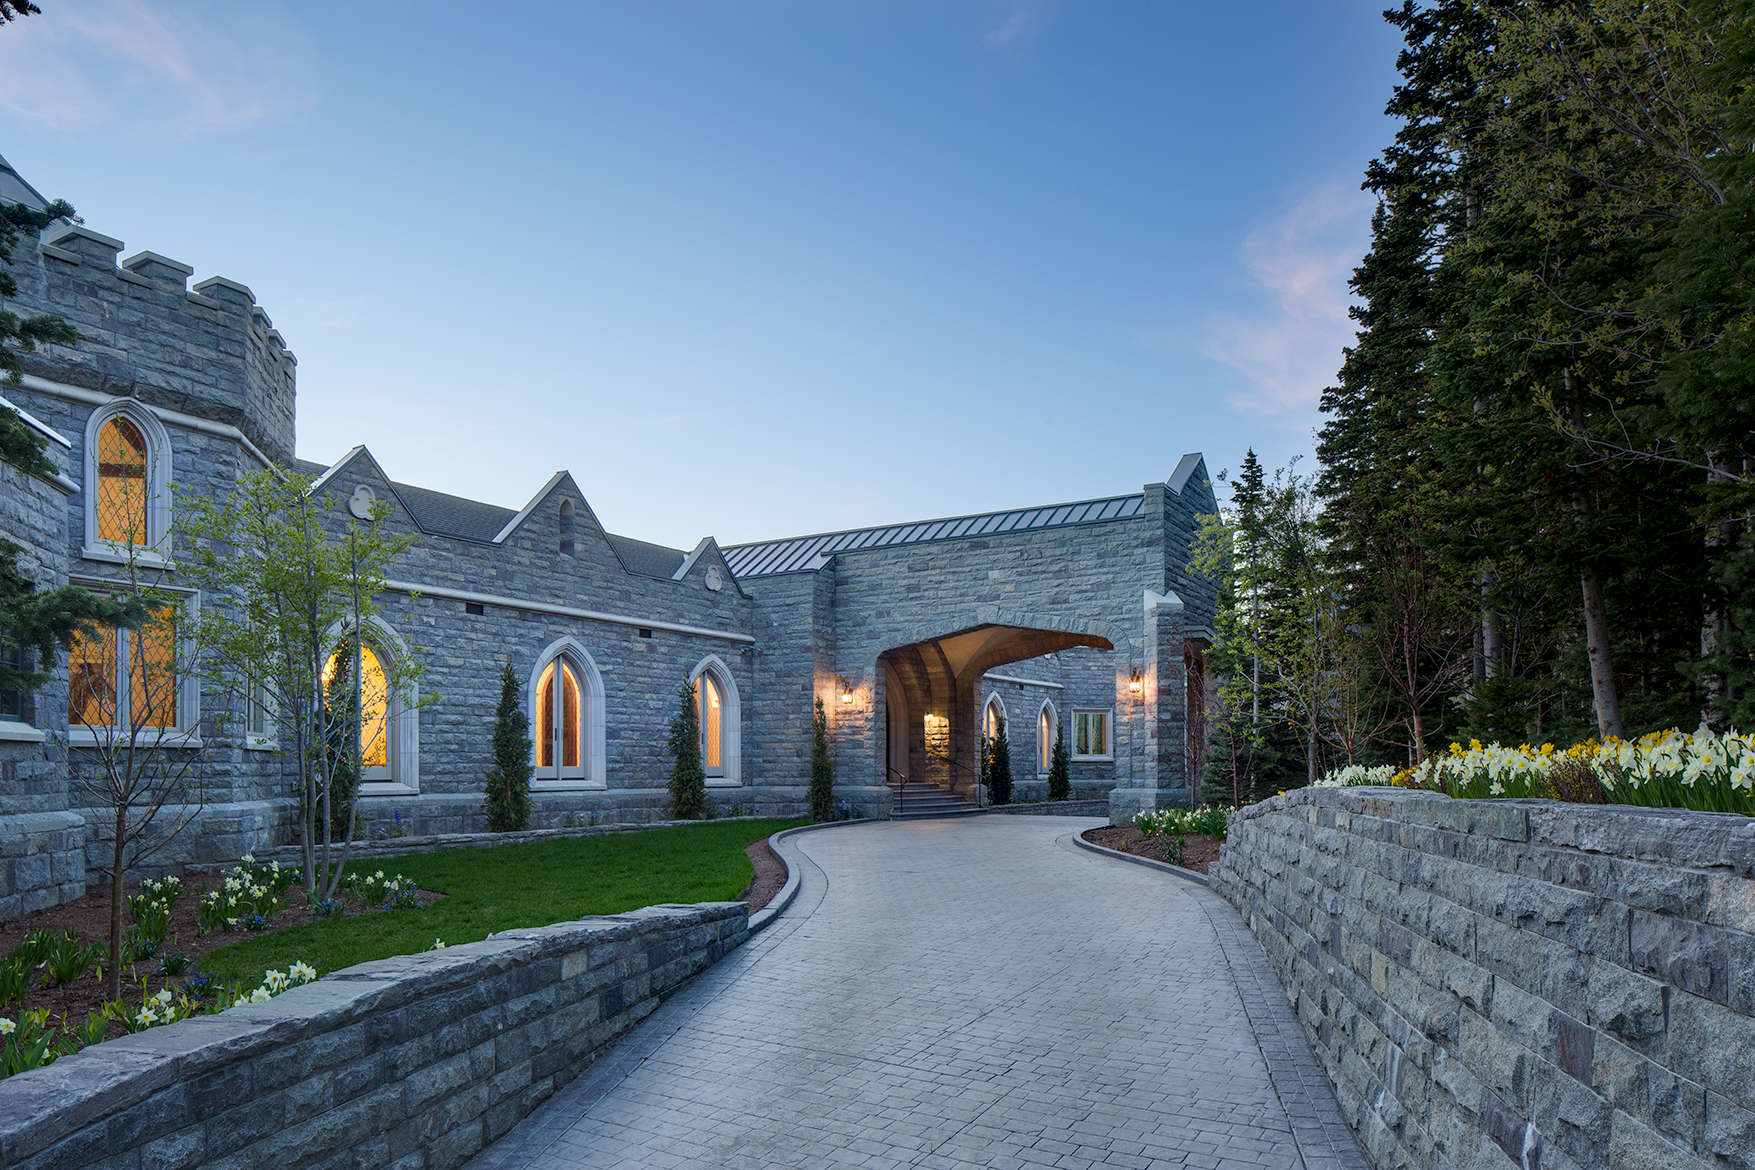 Exterior view at dusk looking up stone walled drive way of a Scottish manor house in Park City, UT with glowing windows.